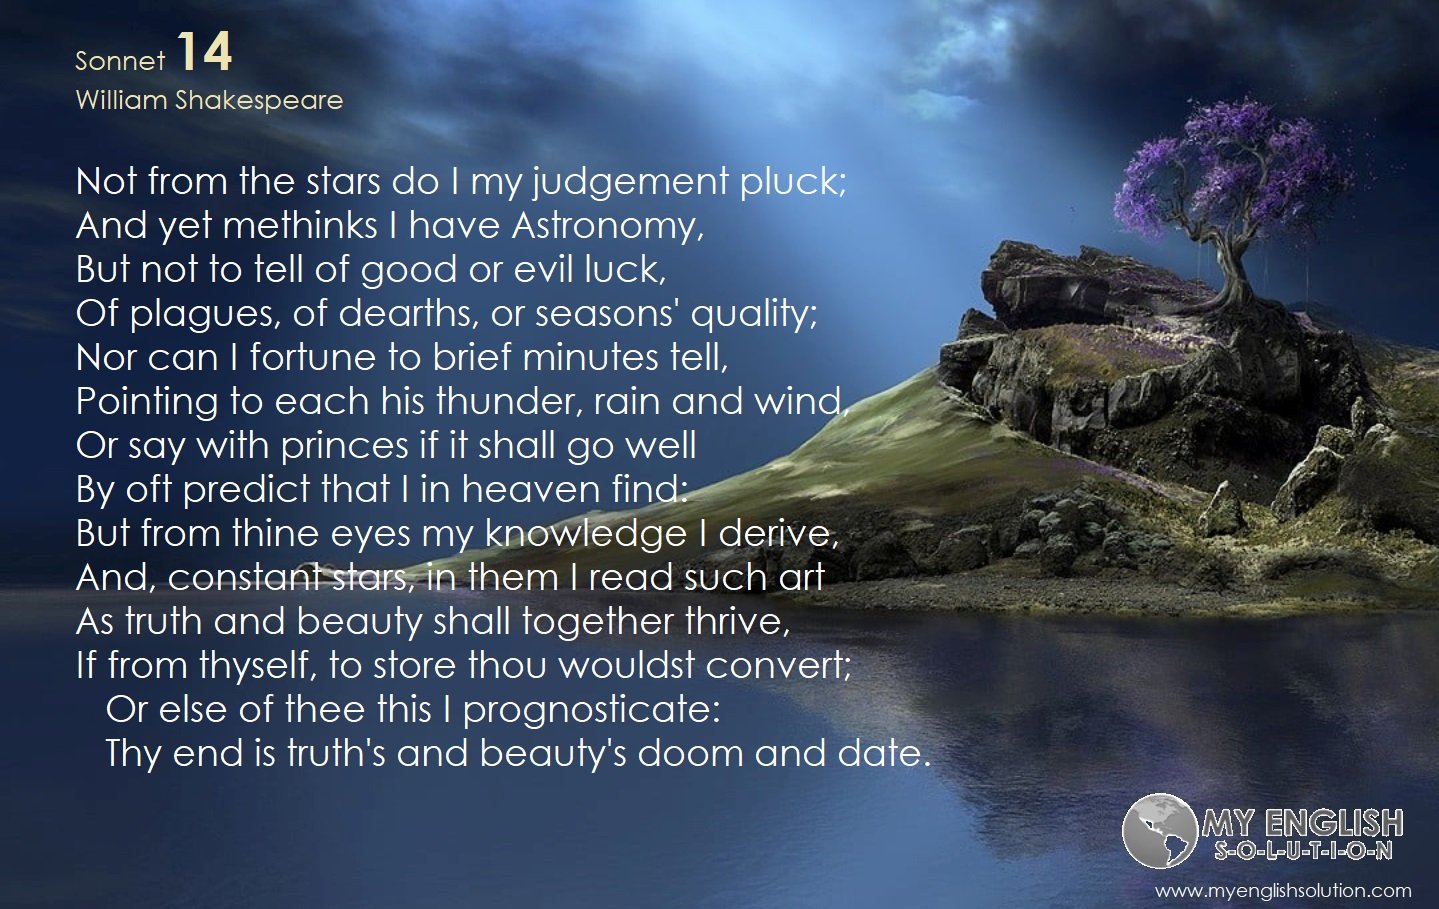 Sonnet No_014_william shakespeare_not from the stars do I my judgement pluck